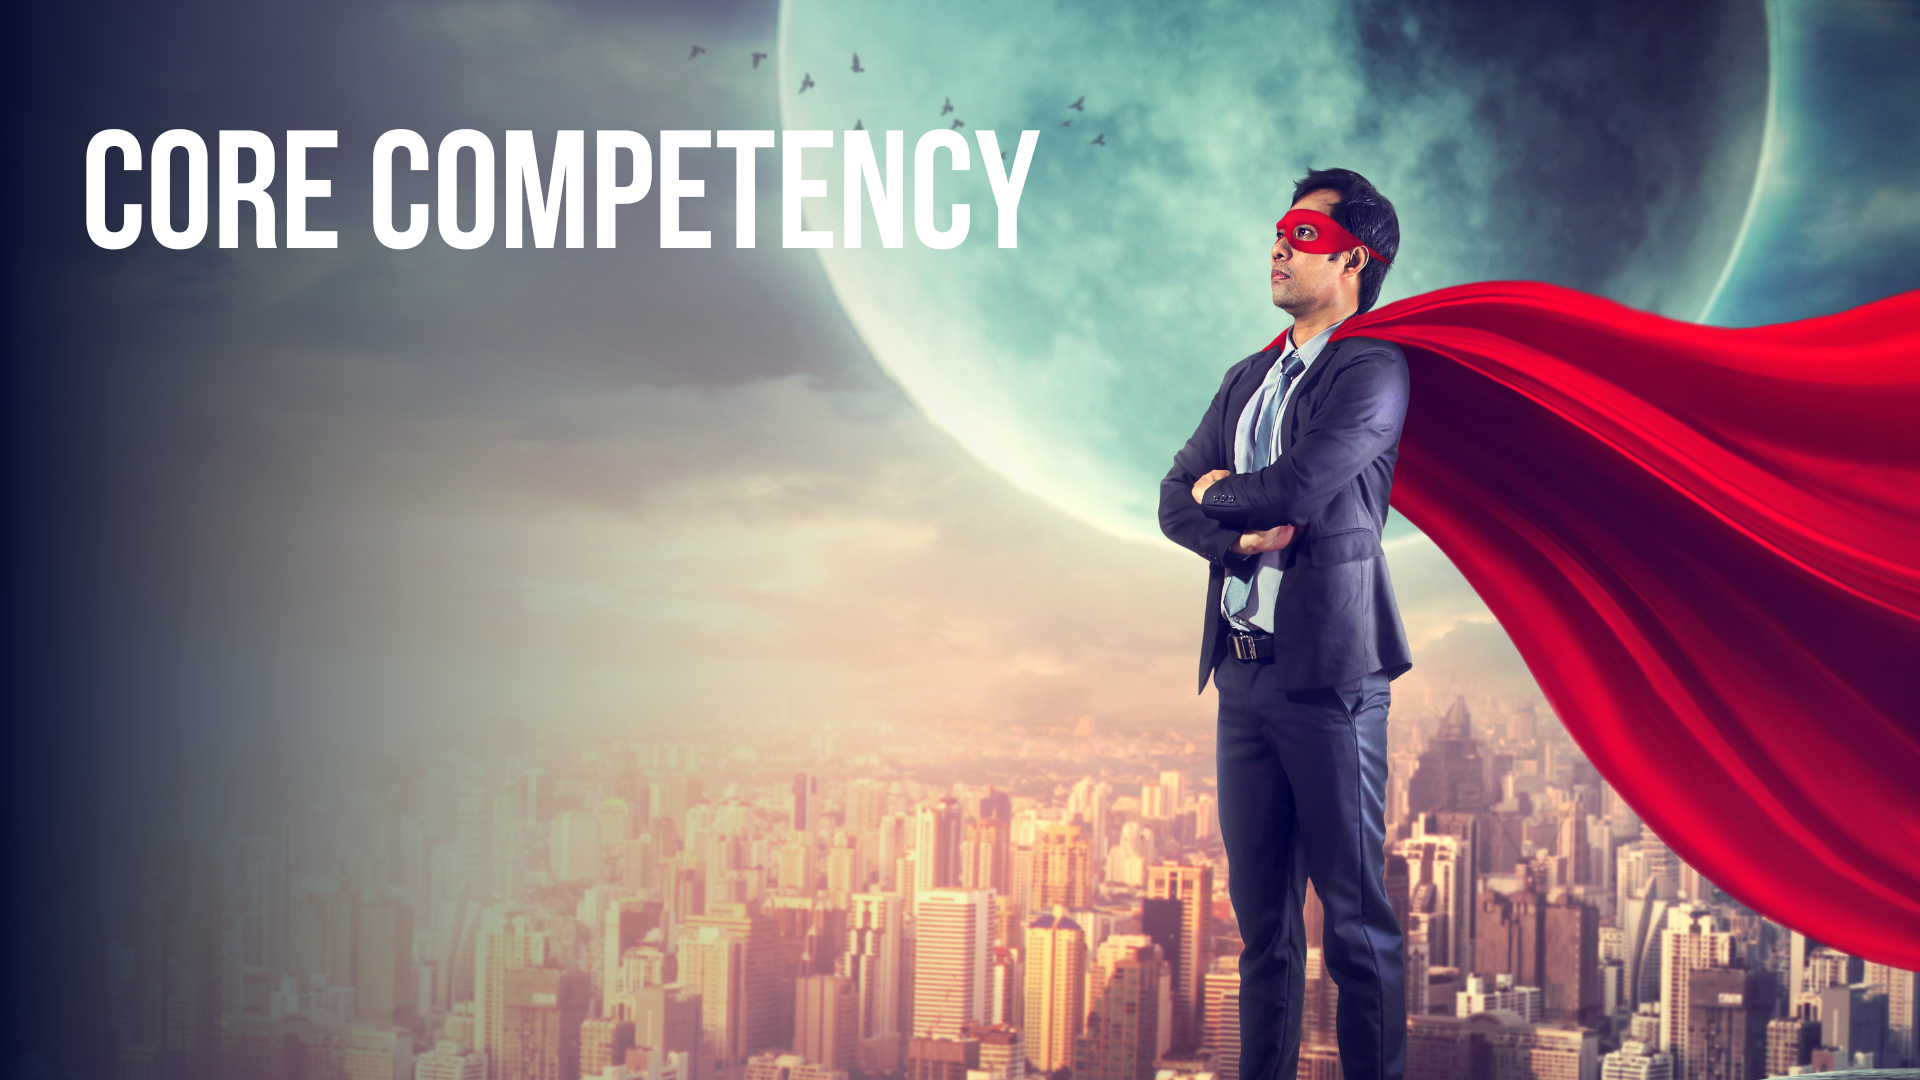 The Crucial Importance of Honing Core Competencies for Late Stage 1st Stage Businesses